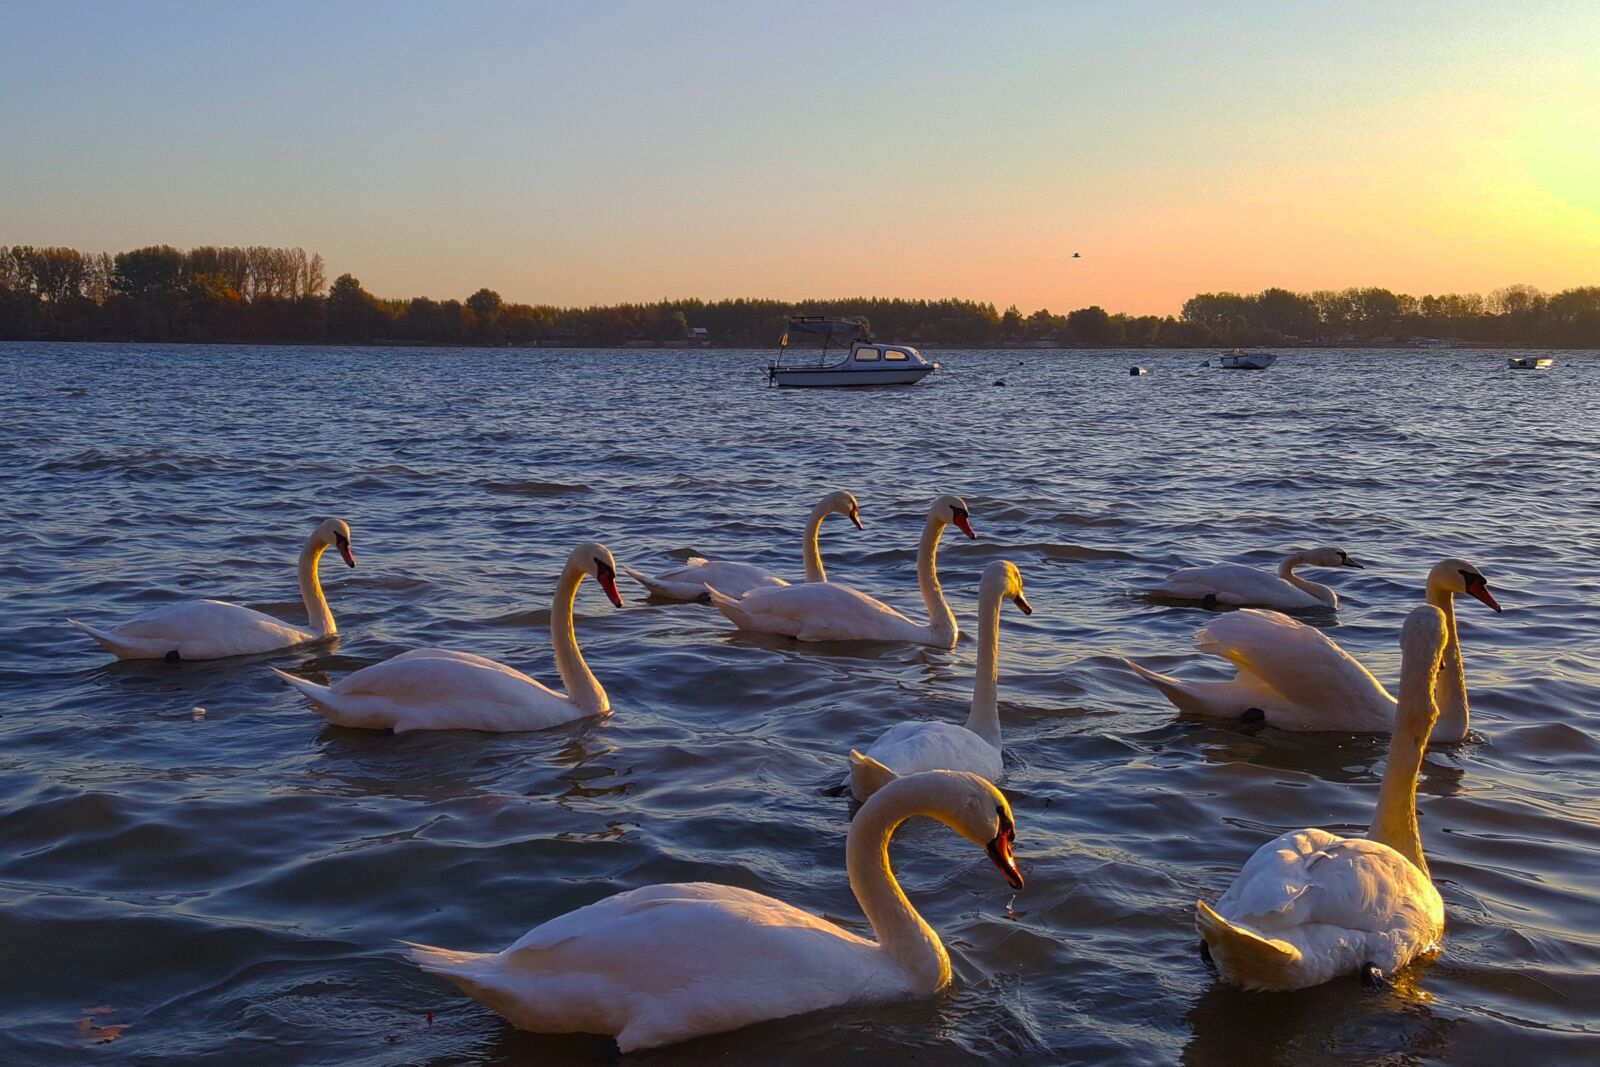 Samsung Galaxy S6 sample photo. Swans, sunset, water photography